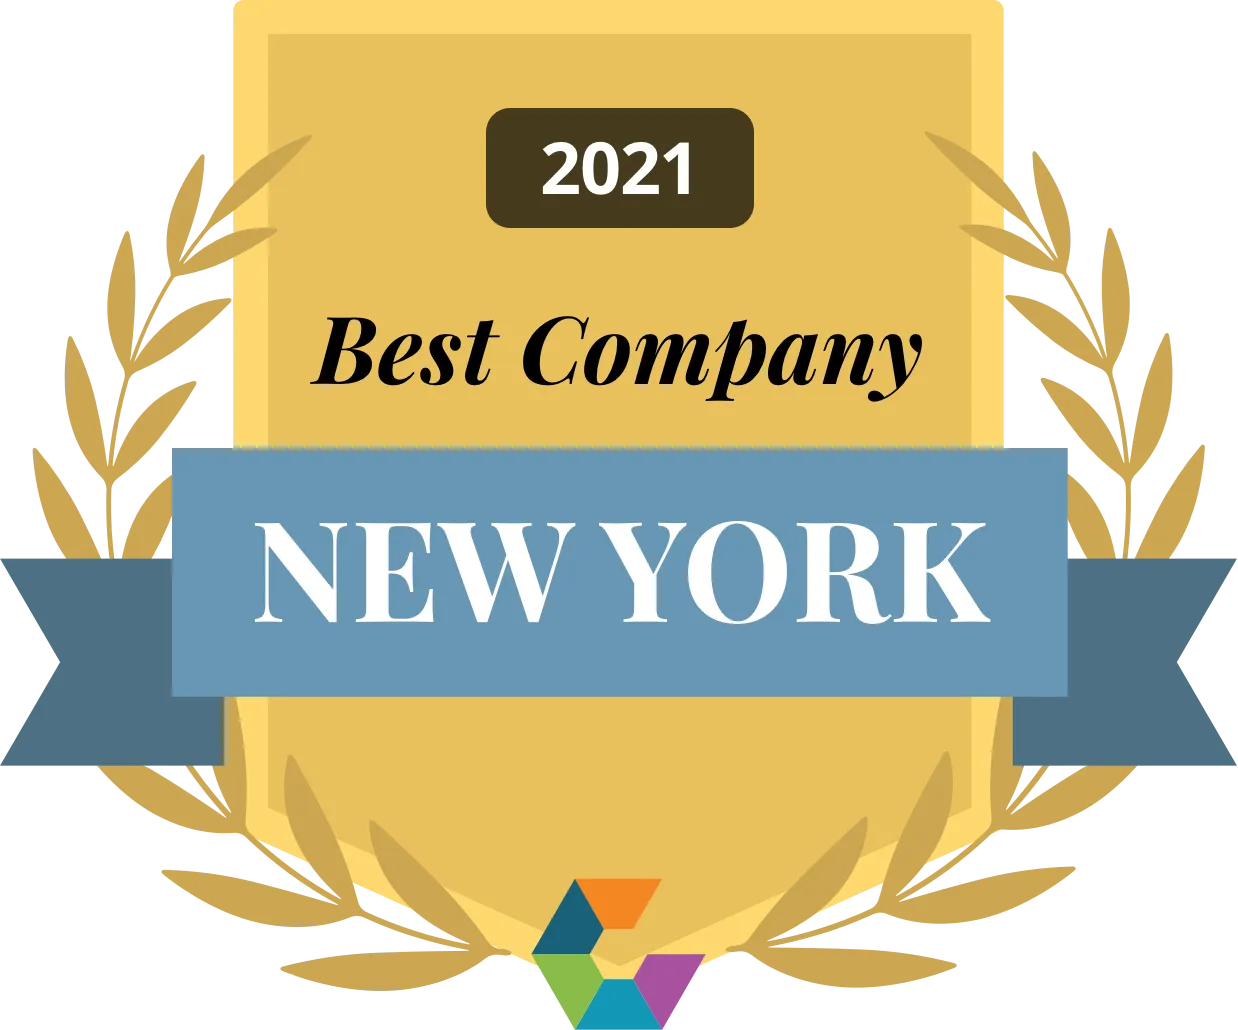 Comparably Best Companies to Work For in New York 2021